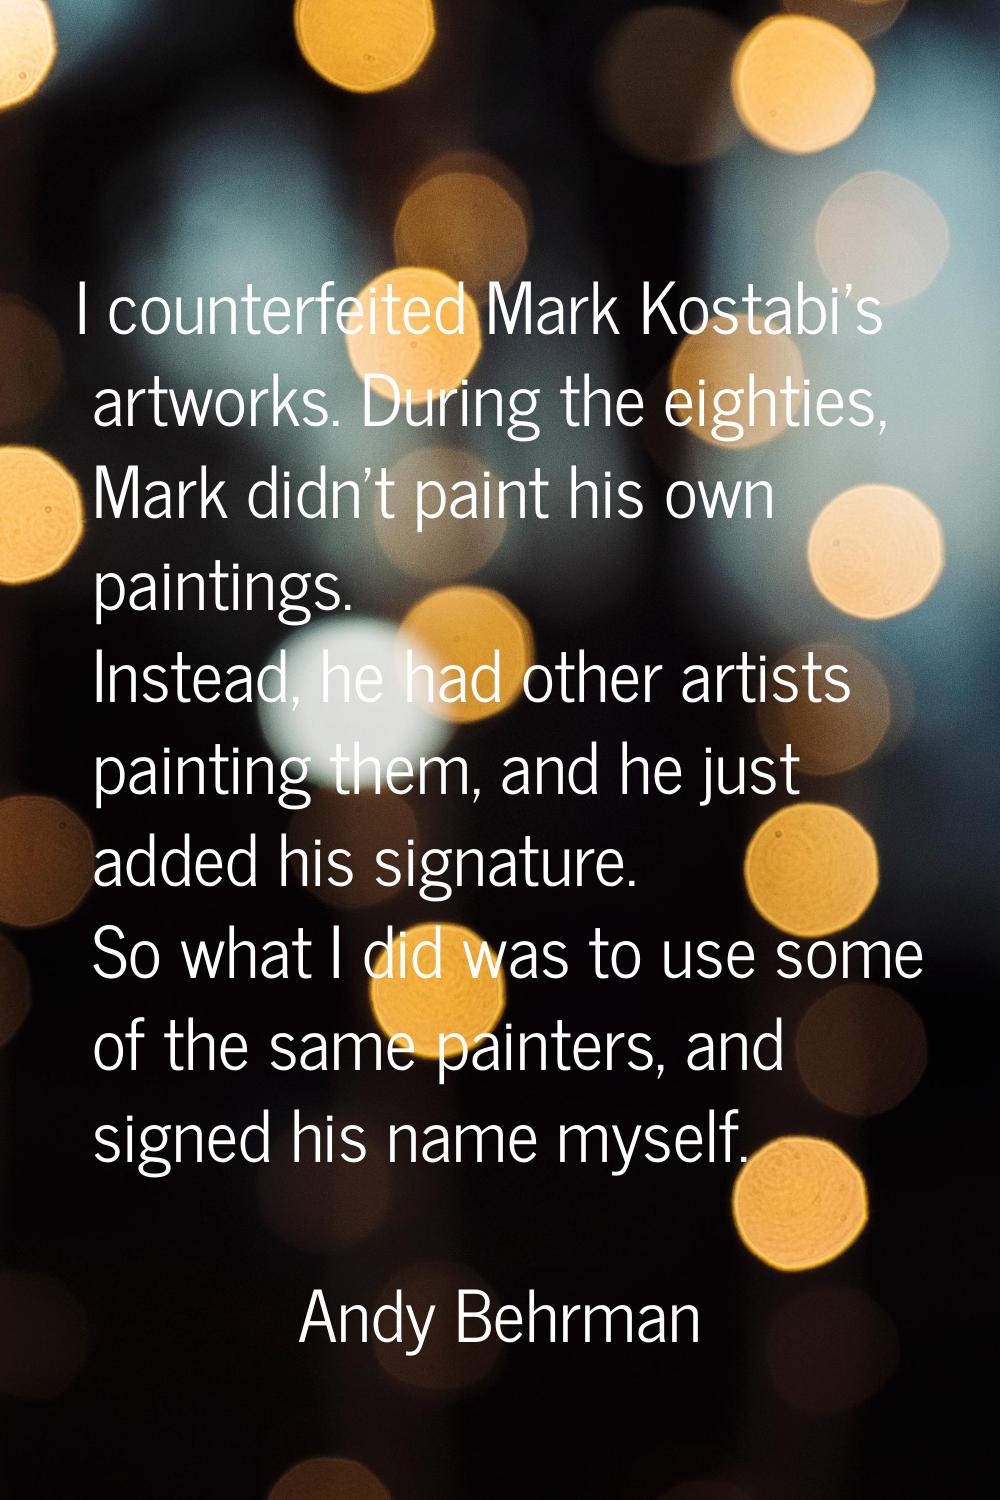 I counterfeited Mark Kostabi's artworks. During the eighties, Mark didn't paint his own paintings. 